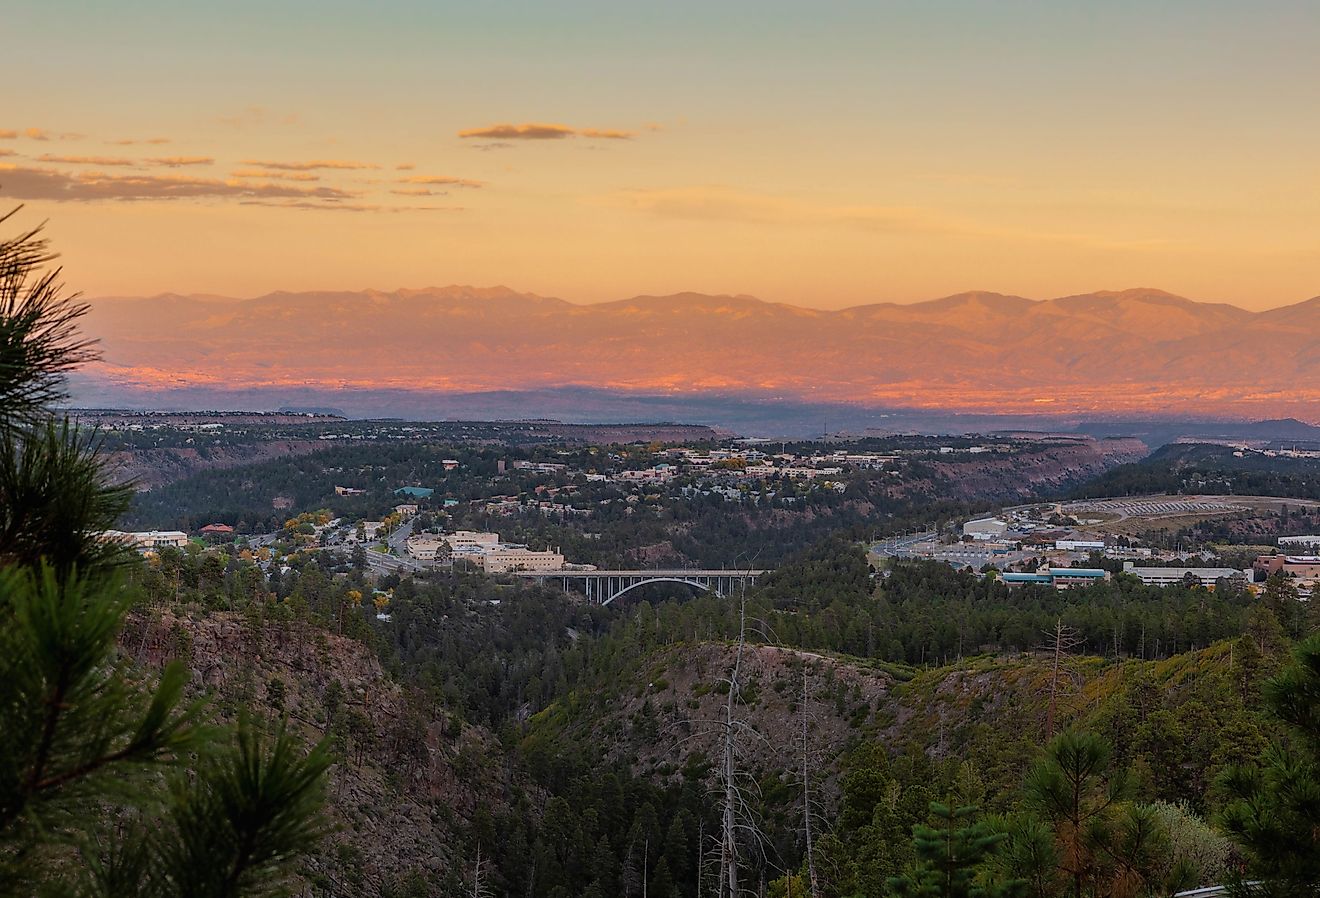 Town of Los Alamos, New Mexico on the left and center, the Omega Bridge in the middle and the Los Alamos National Laboratories on the right.